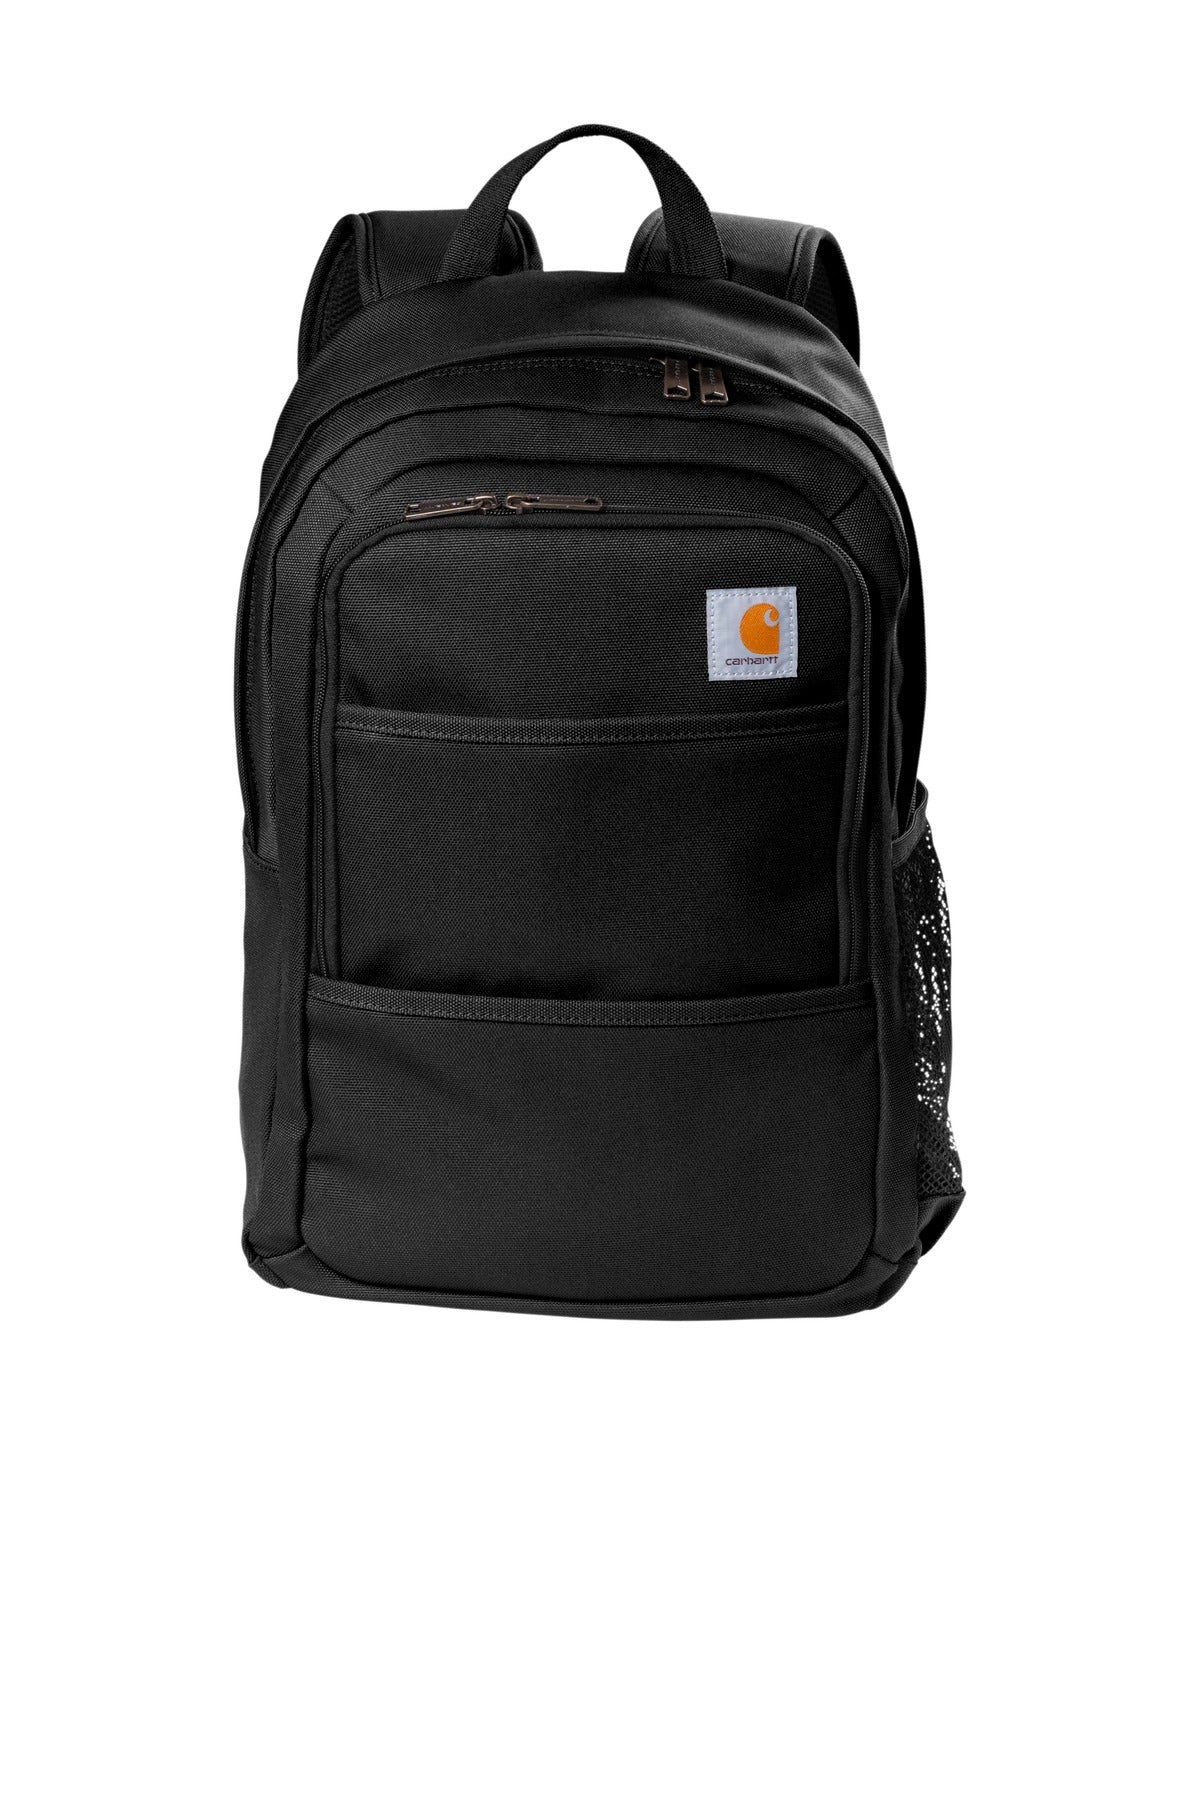 Carhartt® Foundry Series Backpack. CT89350303 - DFW Impression